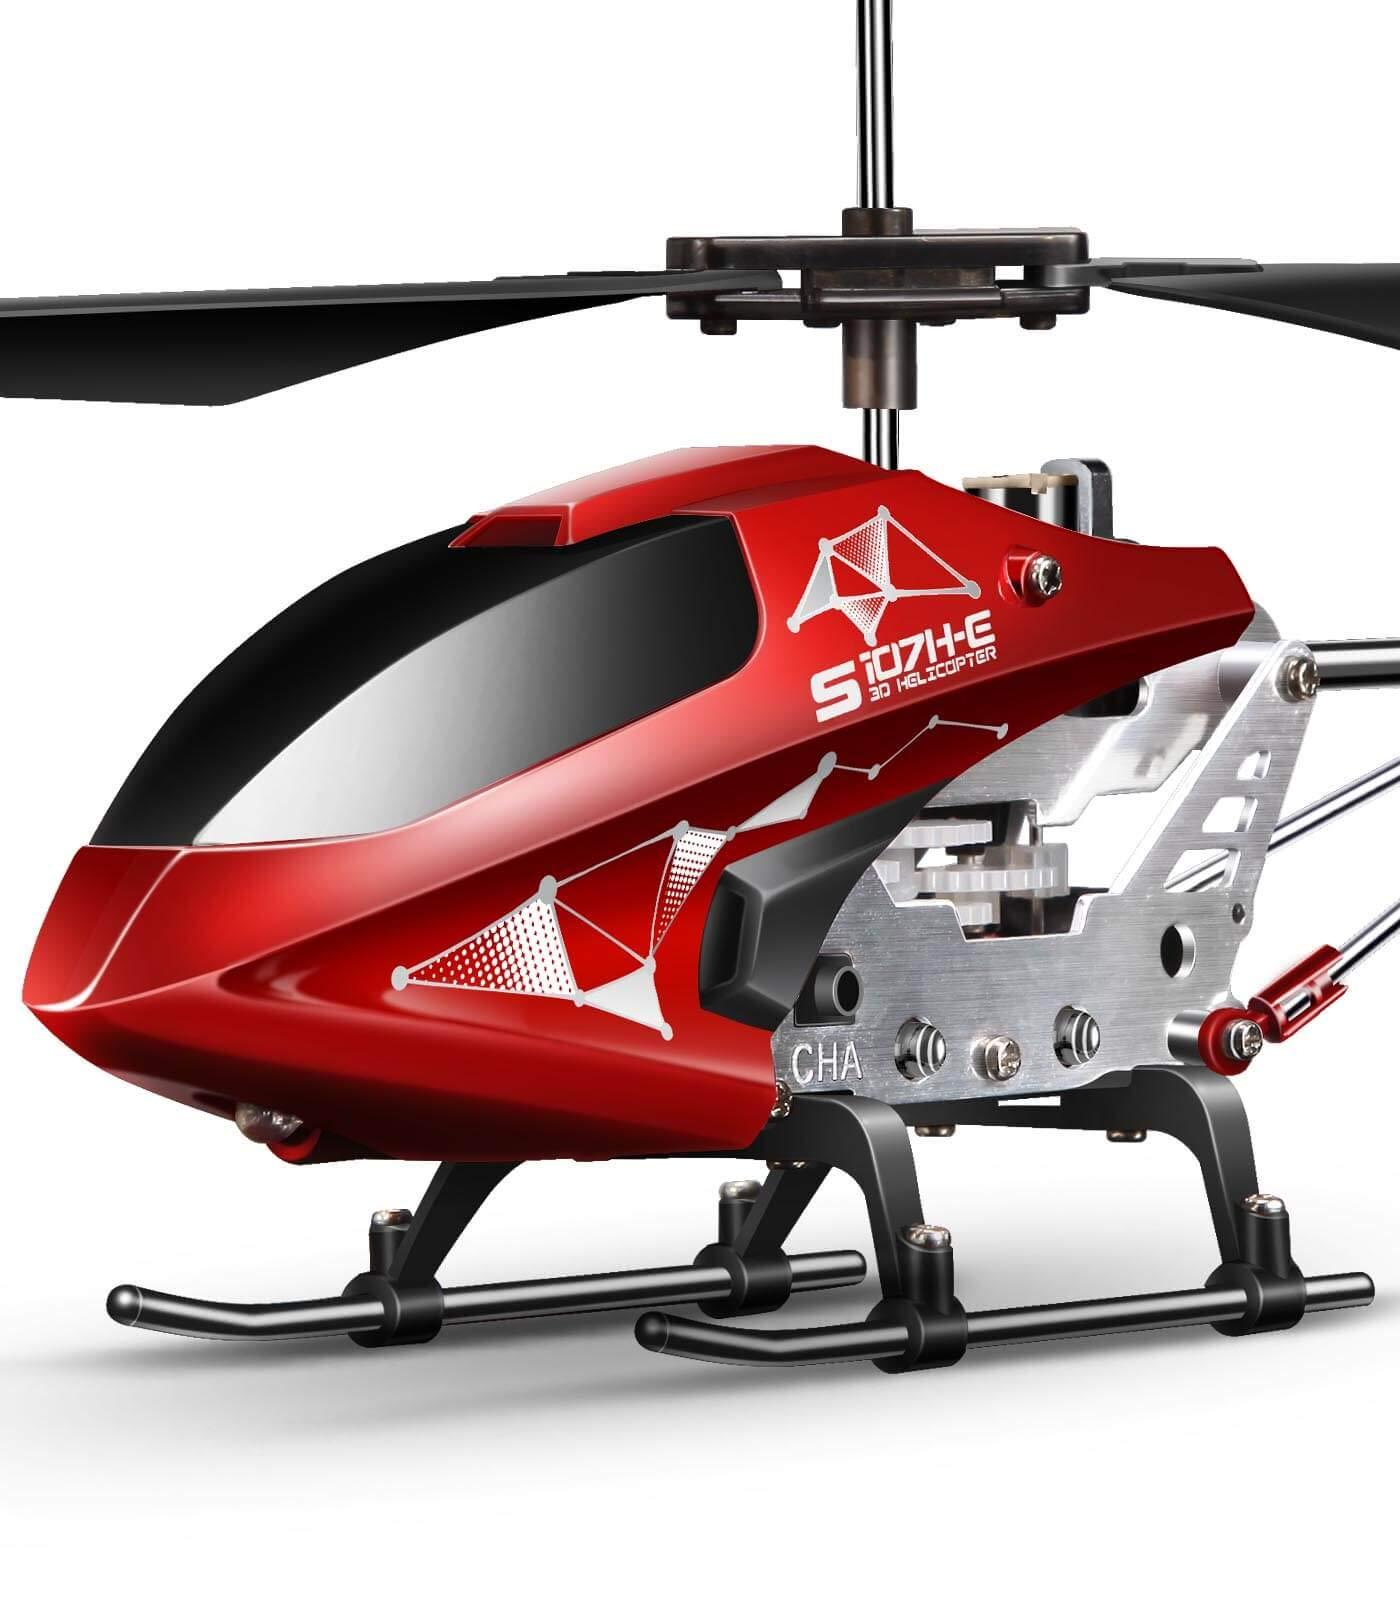 Khelna Helicopter: Enhance Your Khelna Helicopter with These Exciting Accessories and Add-Ons! 